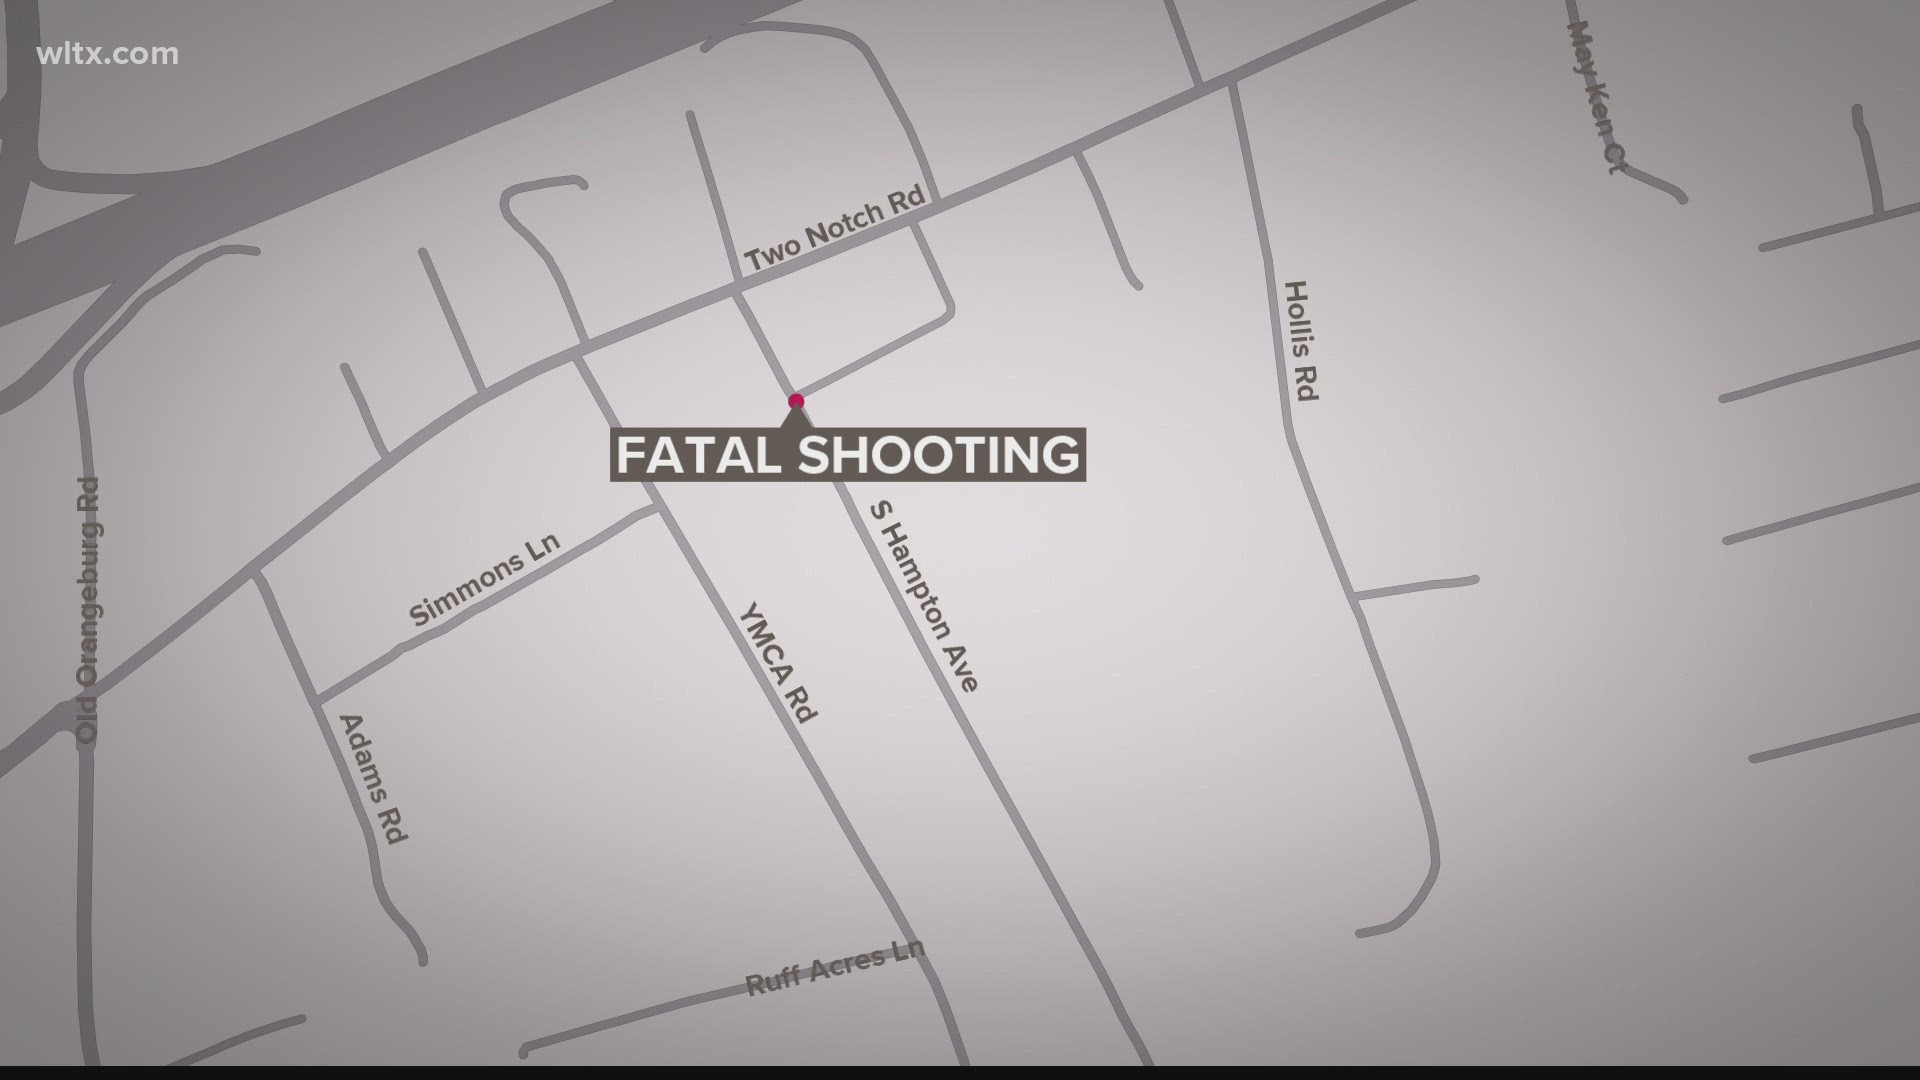 According to the release, the shooting incident happened at a home on South Hampton Avenue in Red Bank Monday night